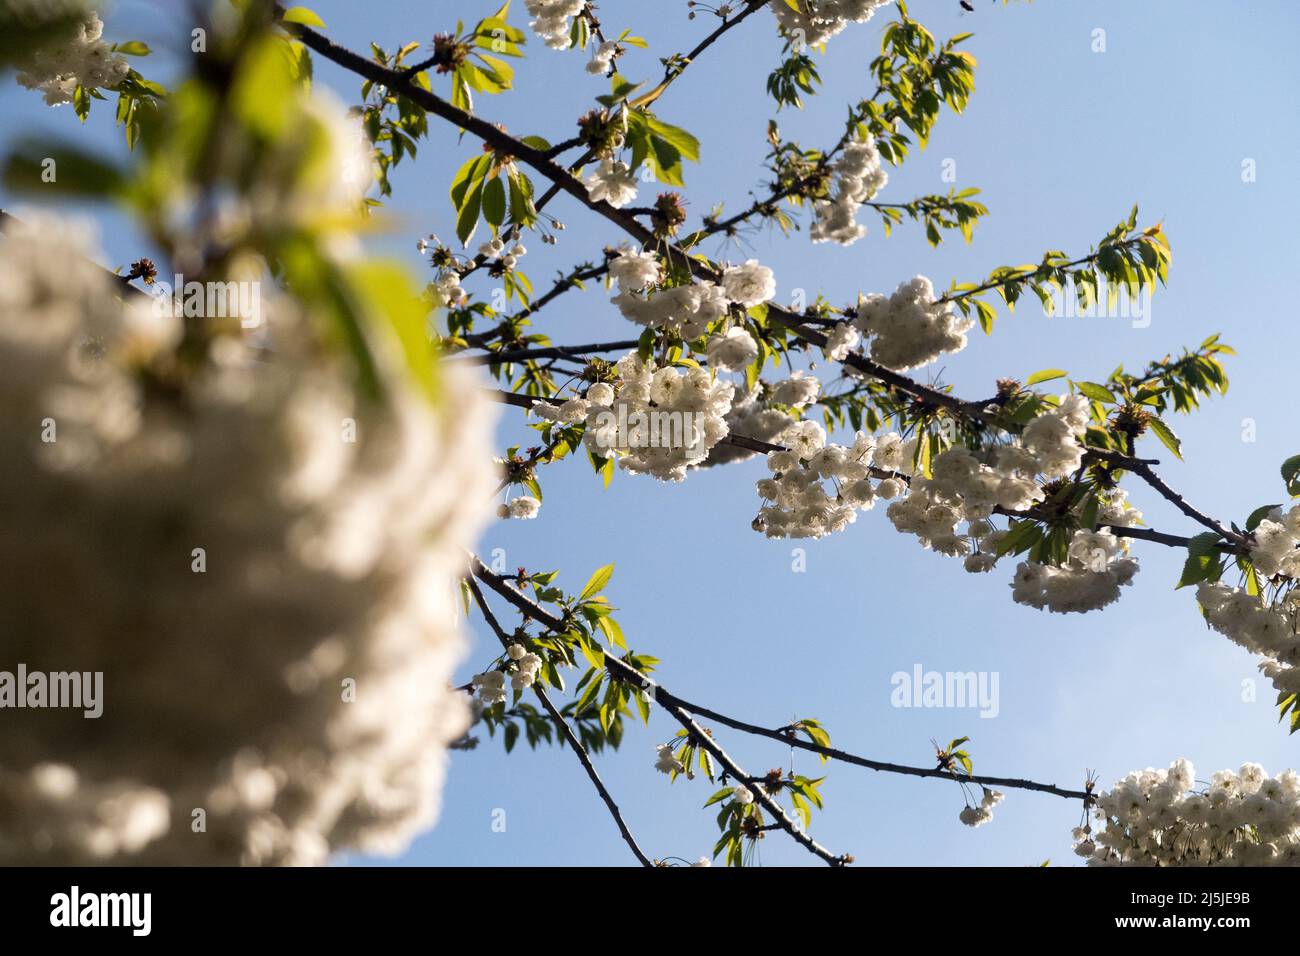 A cherry tree blossoming with white flowers in spring Stock Photo